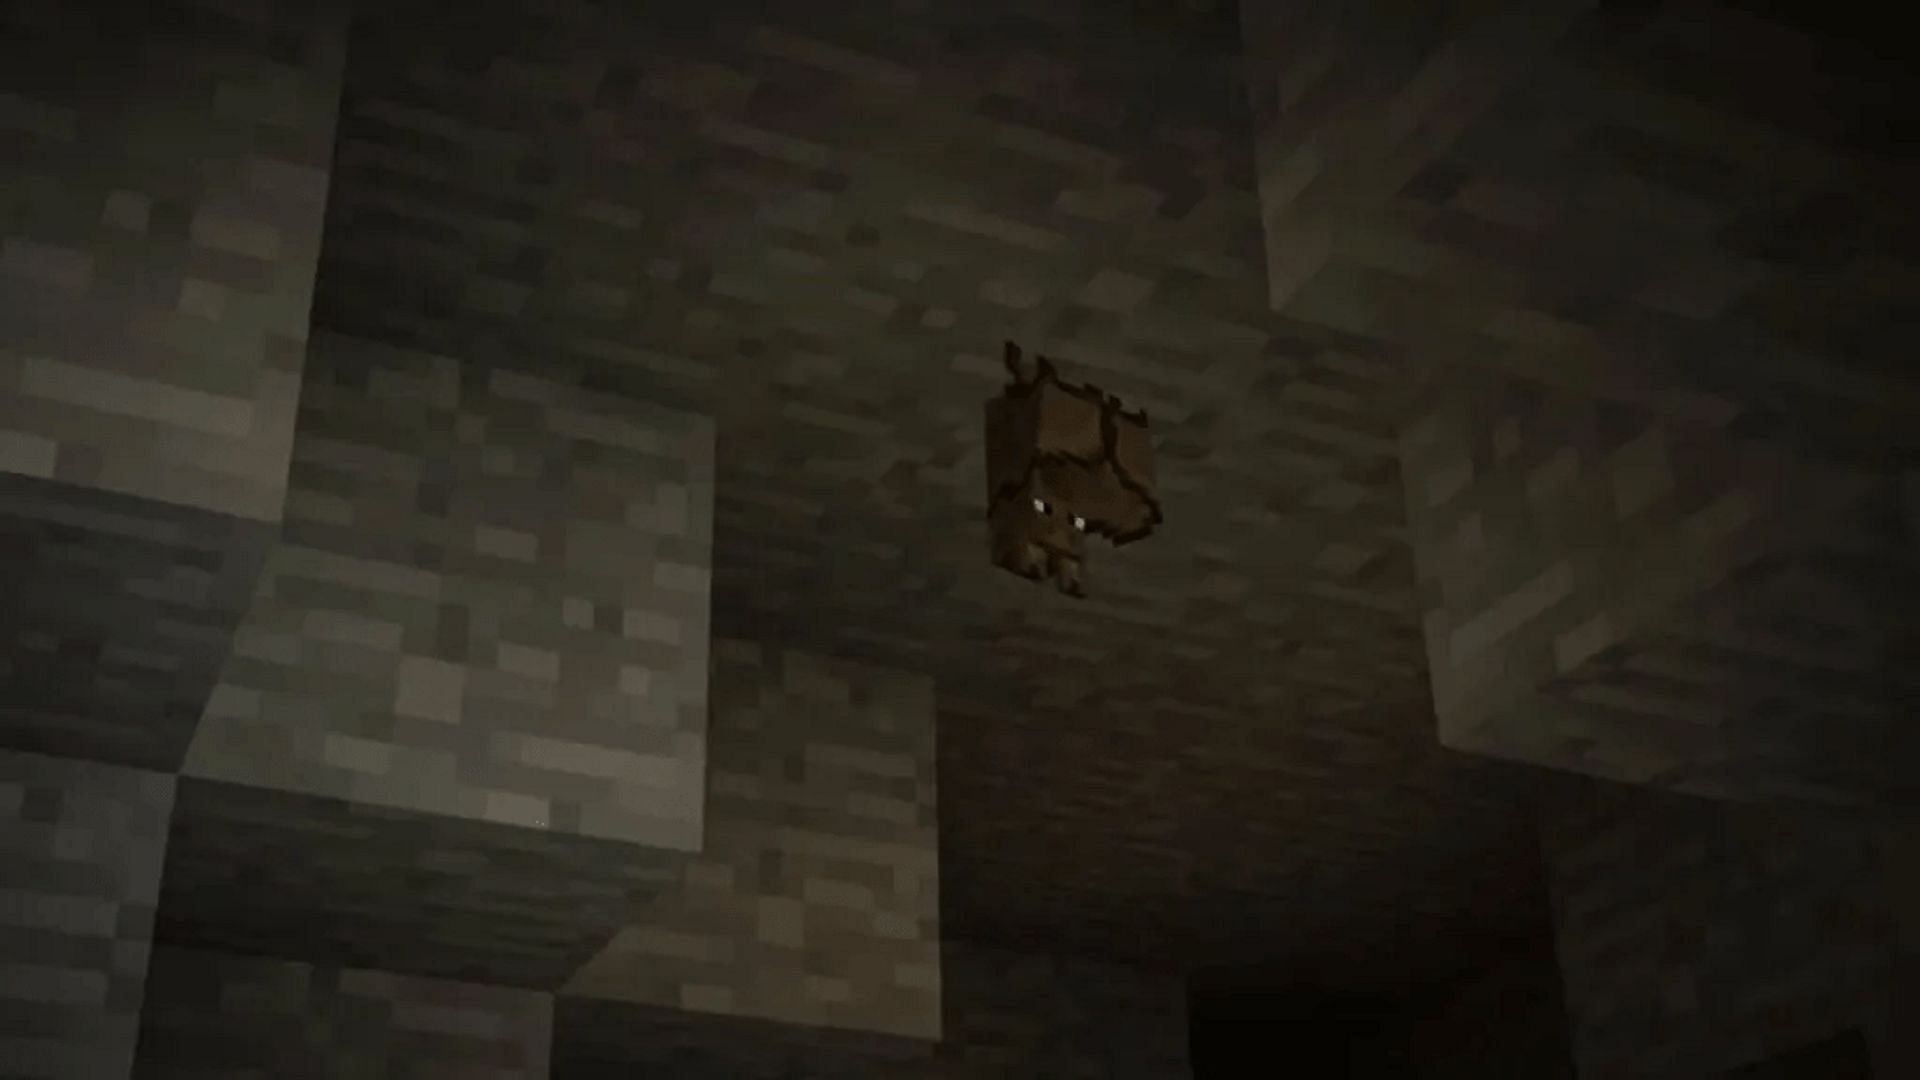 Bats in Minecraft tend to frequent tunnels (Image via Mojang)